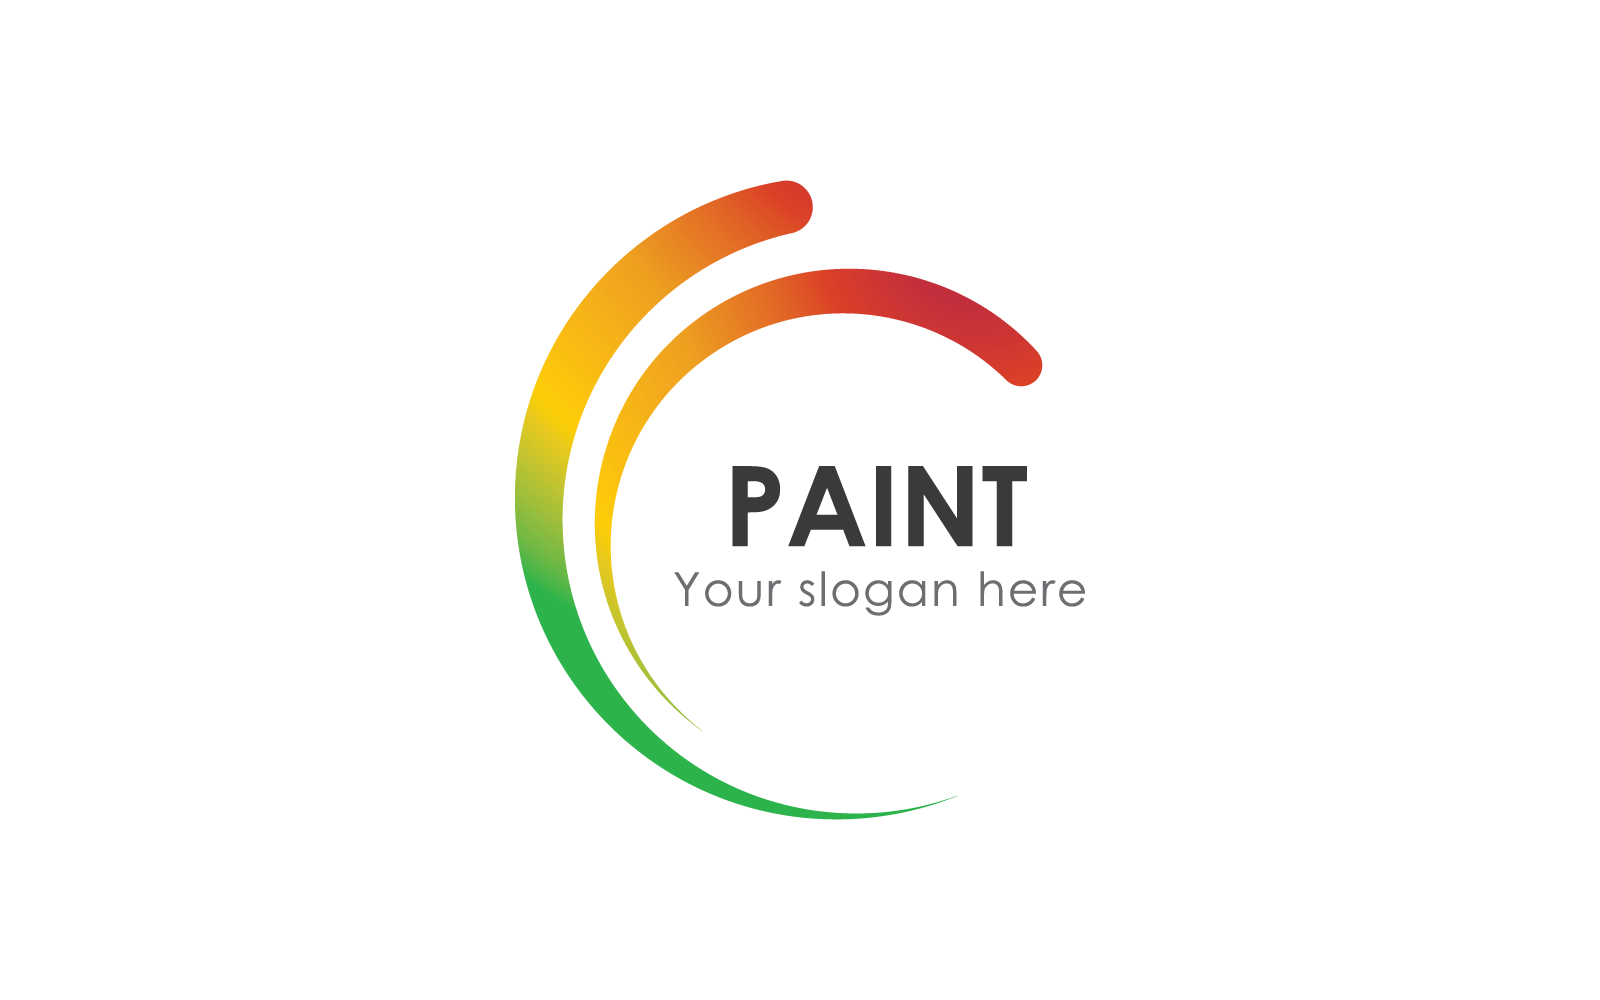 Paint House logo icon business vector flat design template Logo Template